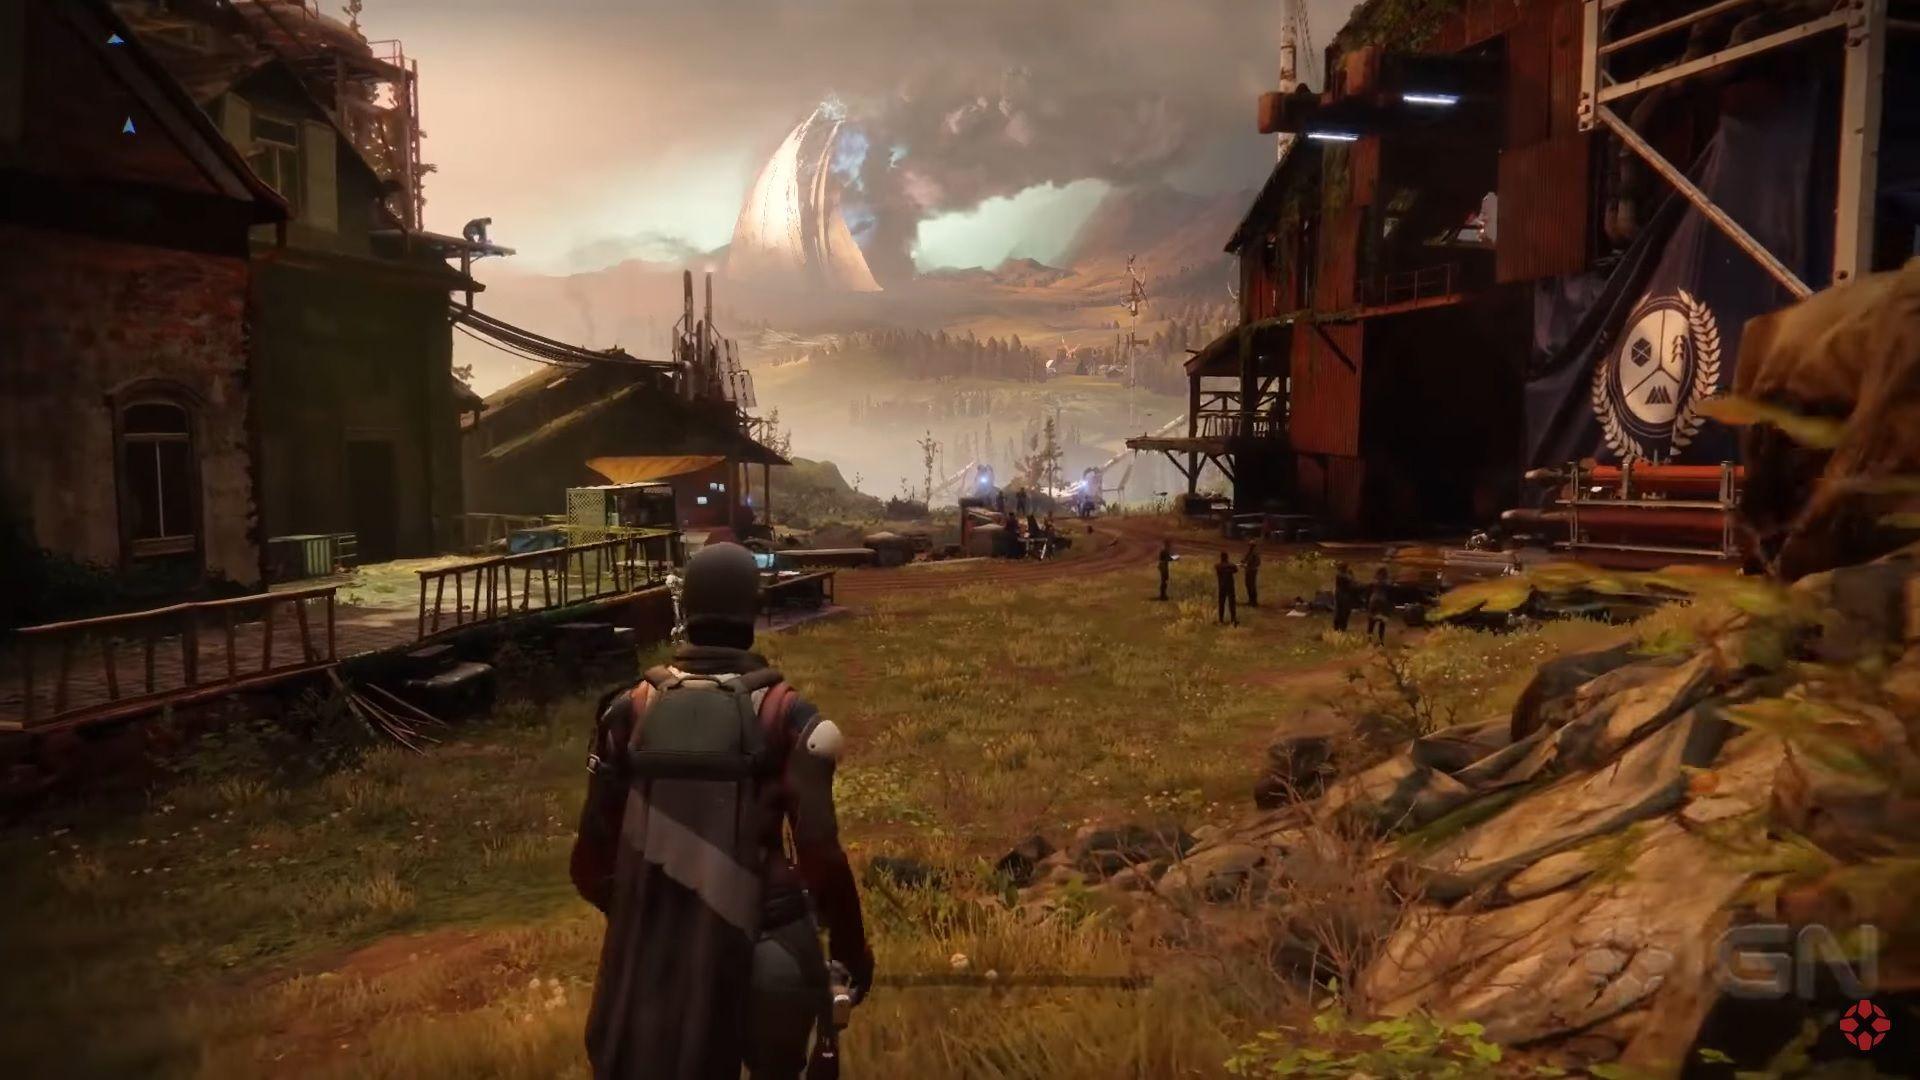 Destiny 2's open beta social space The Farm will only be live